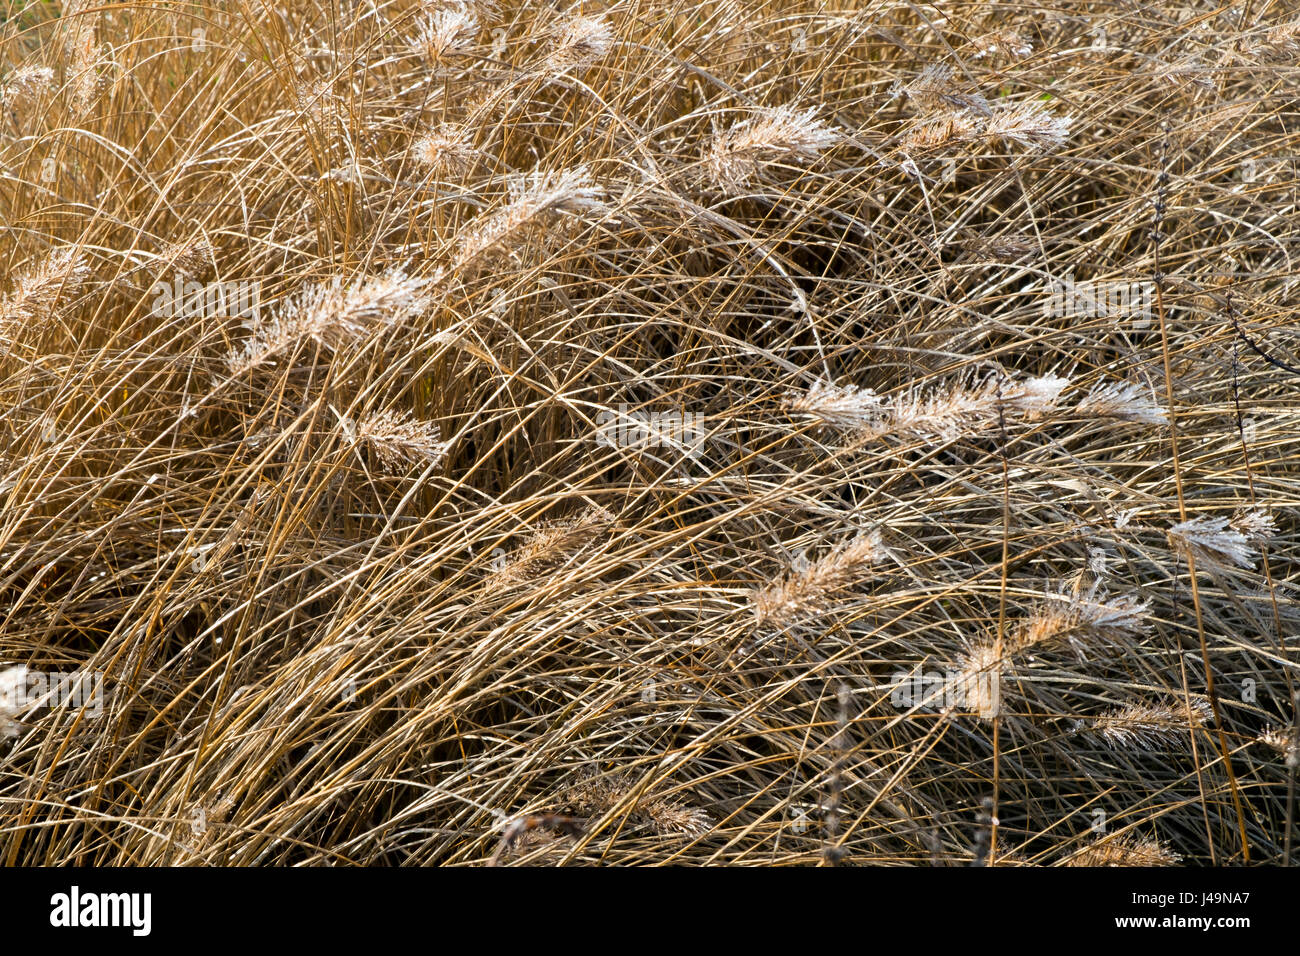 Frost melting in winter sunshine on decorative grasses seed heads Stock Photo